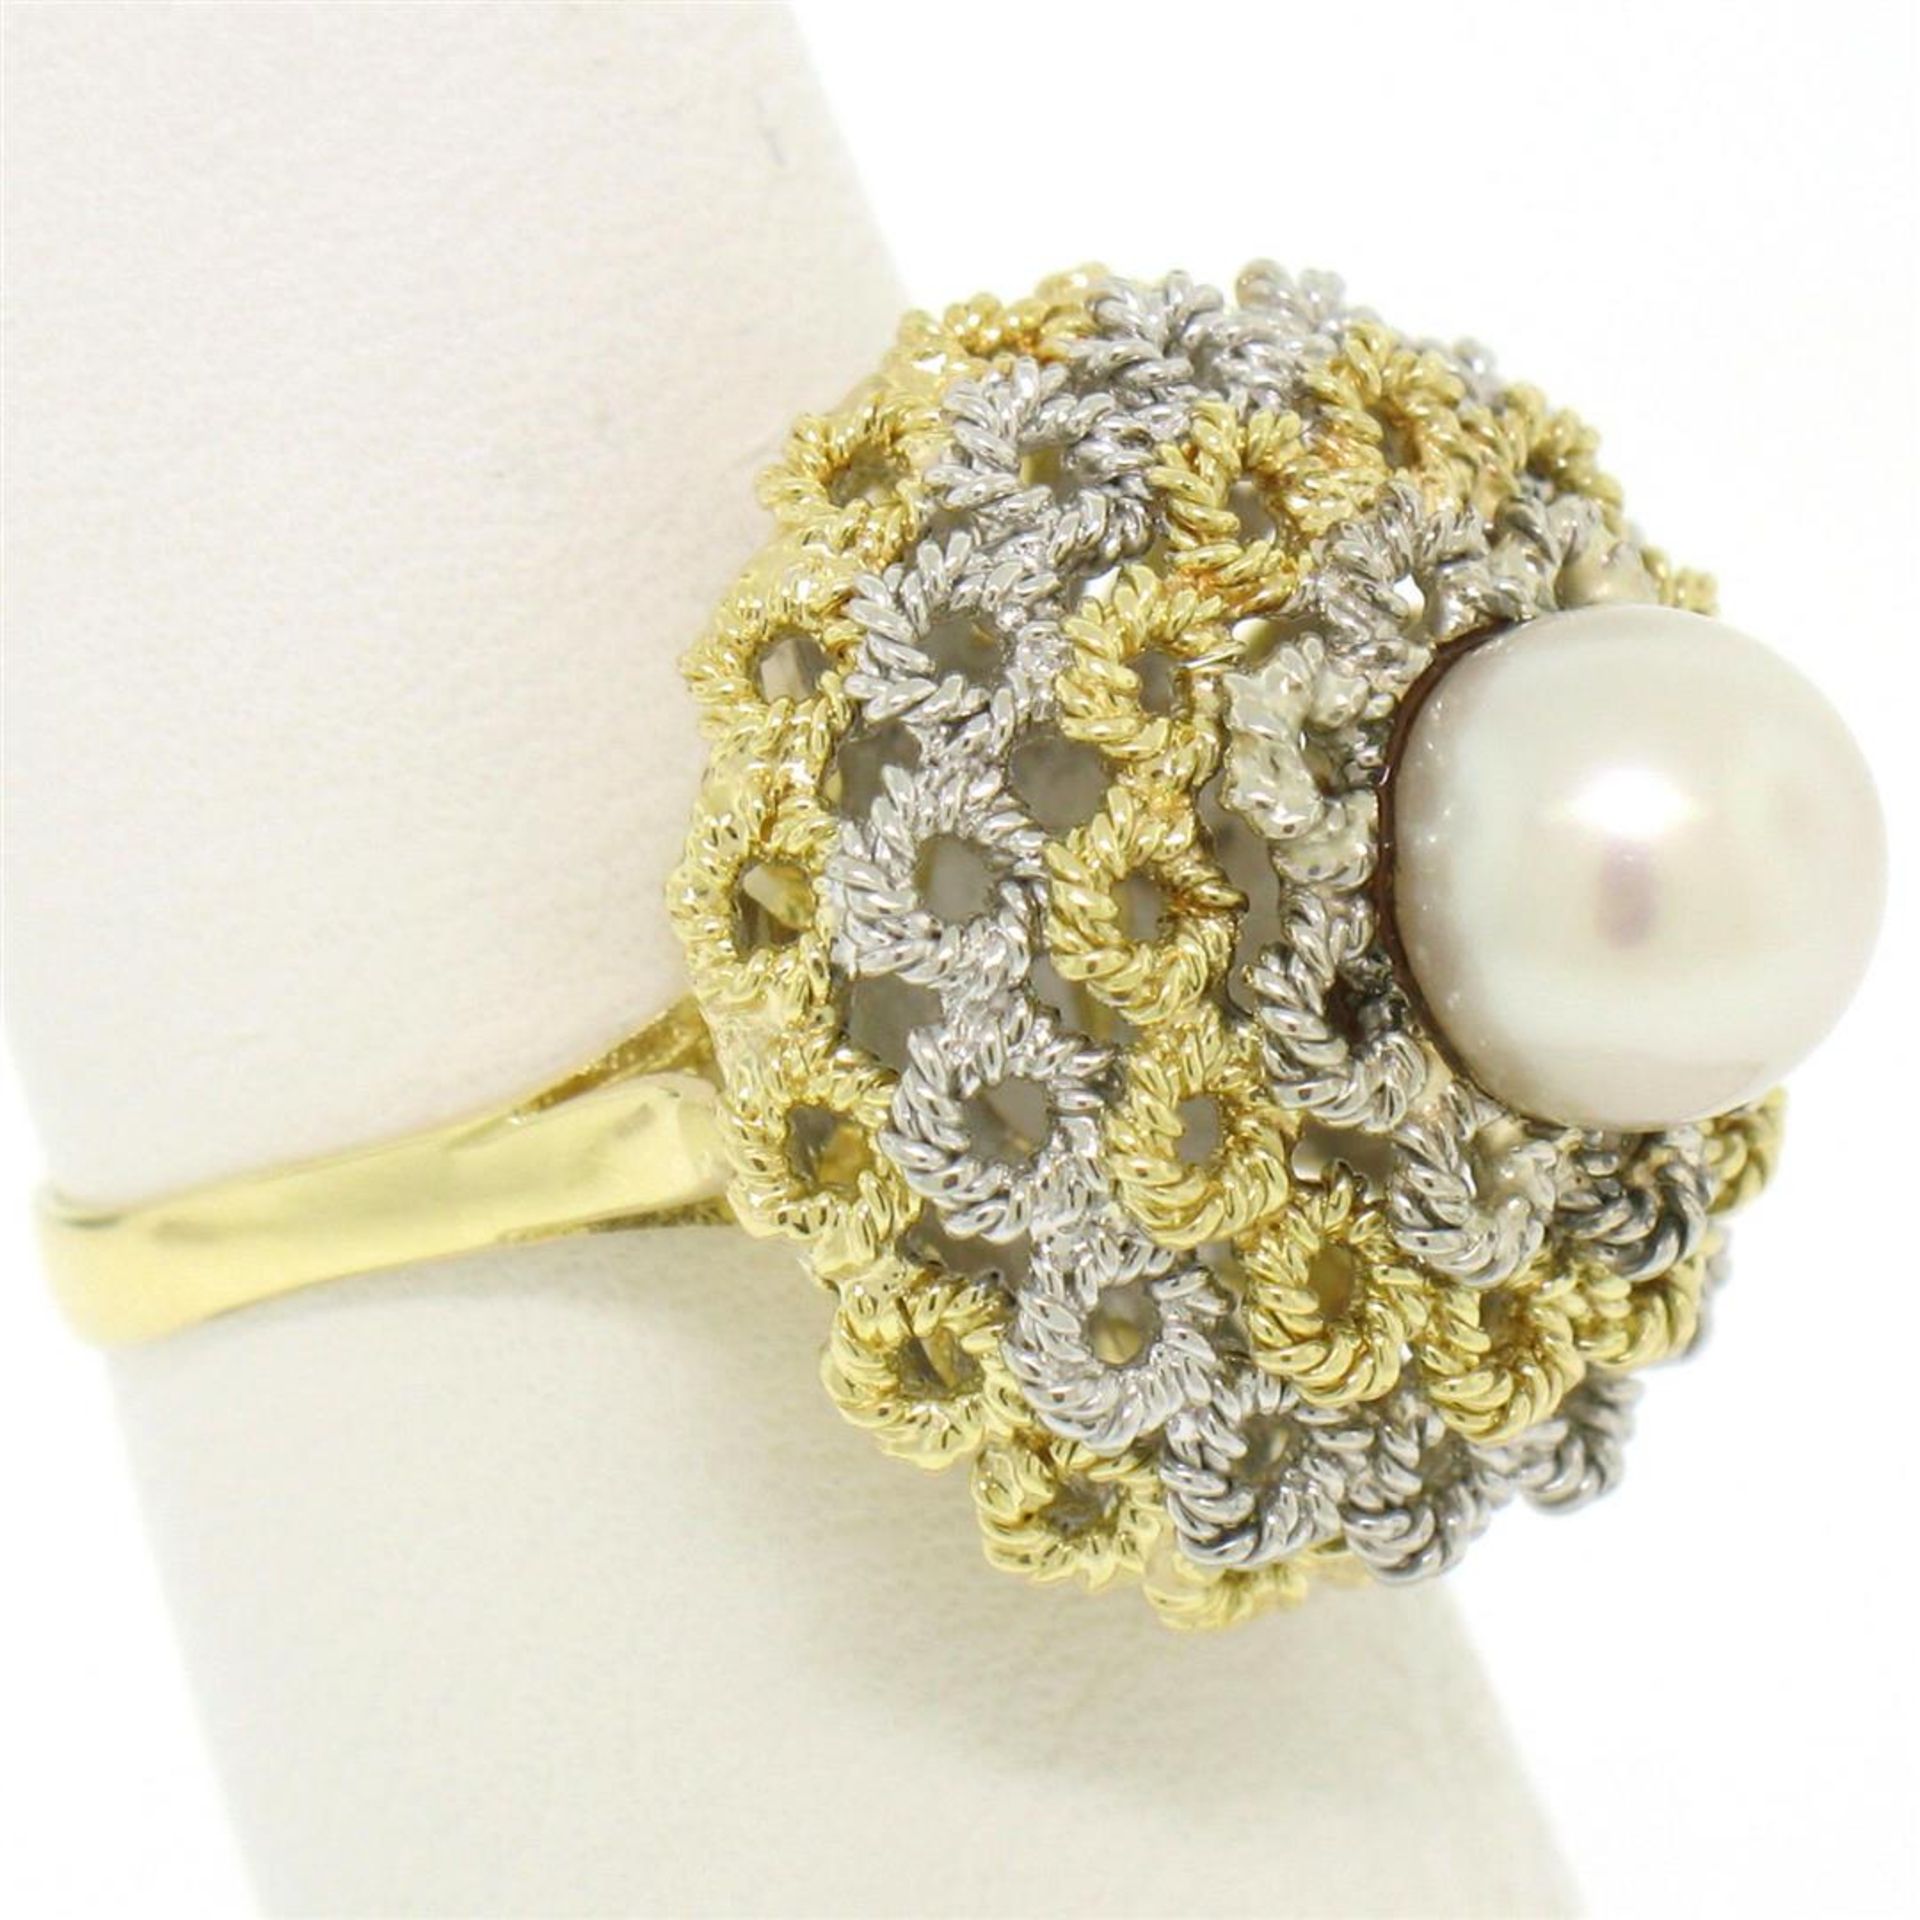 Handmade 18kt Yellow and White Gold Akoya Pearl Cocktail Ring - Image 3 of 7